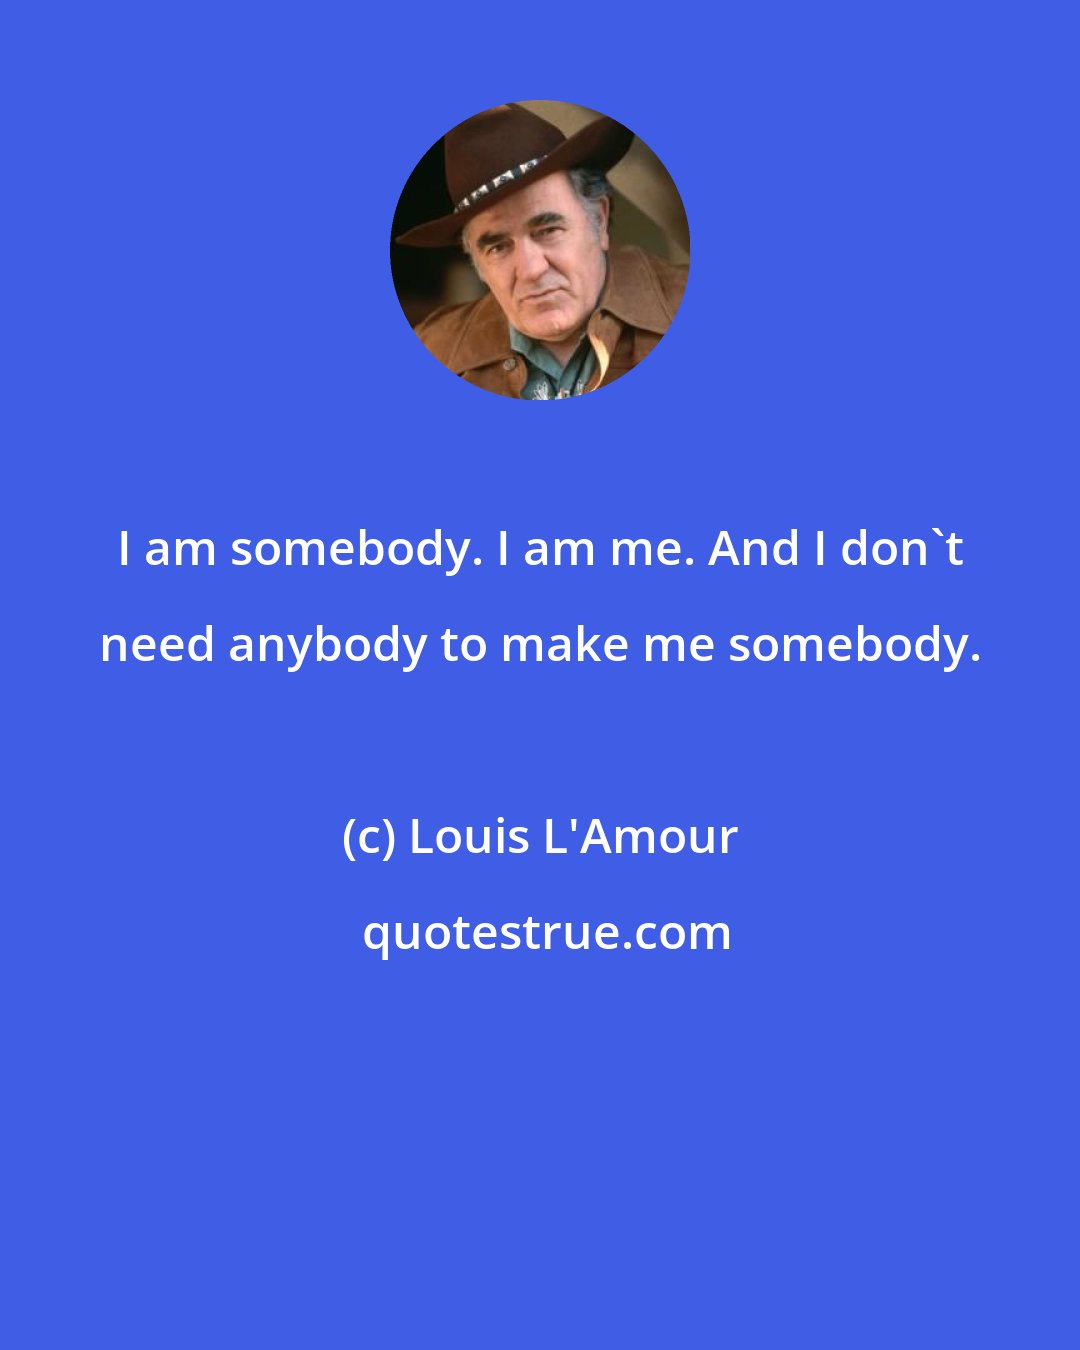 Louis L'Amour: I am somebody. I am me. And I don't need anybody to make me somebody.